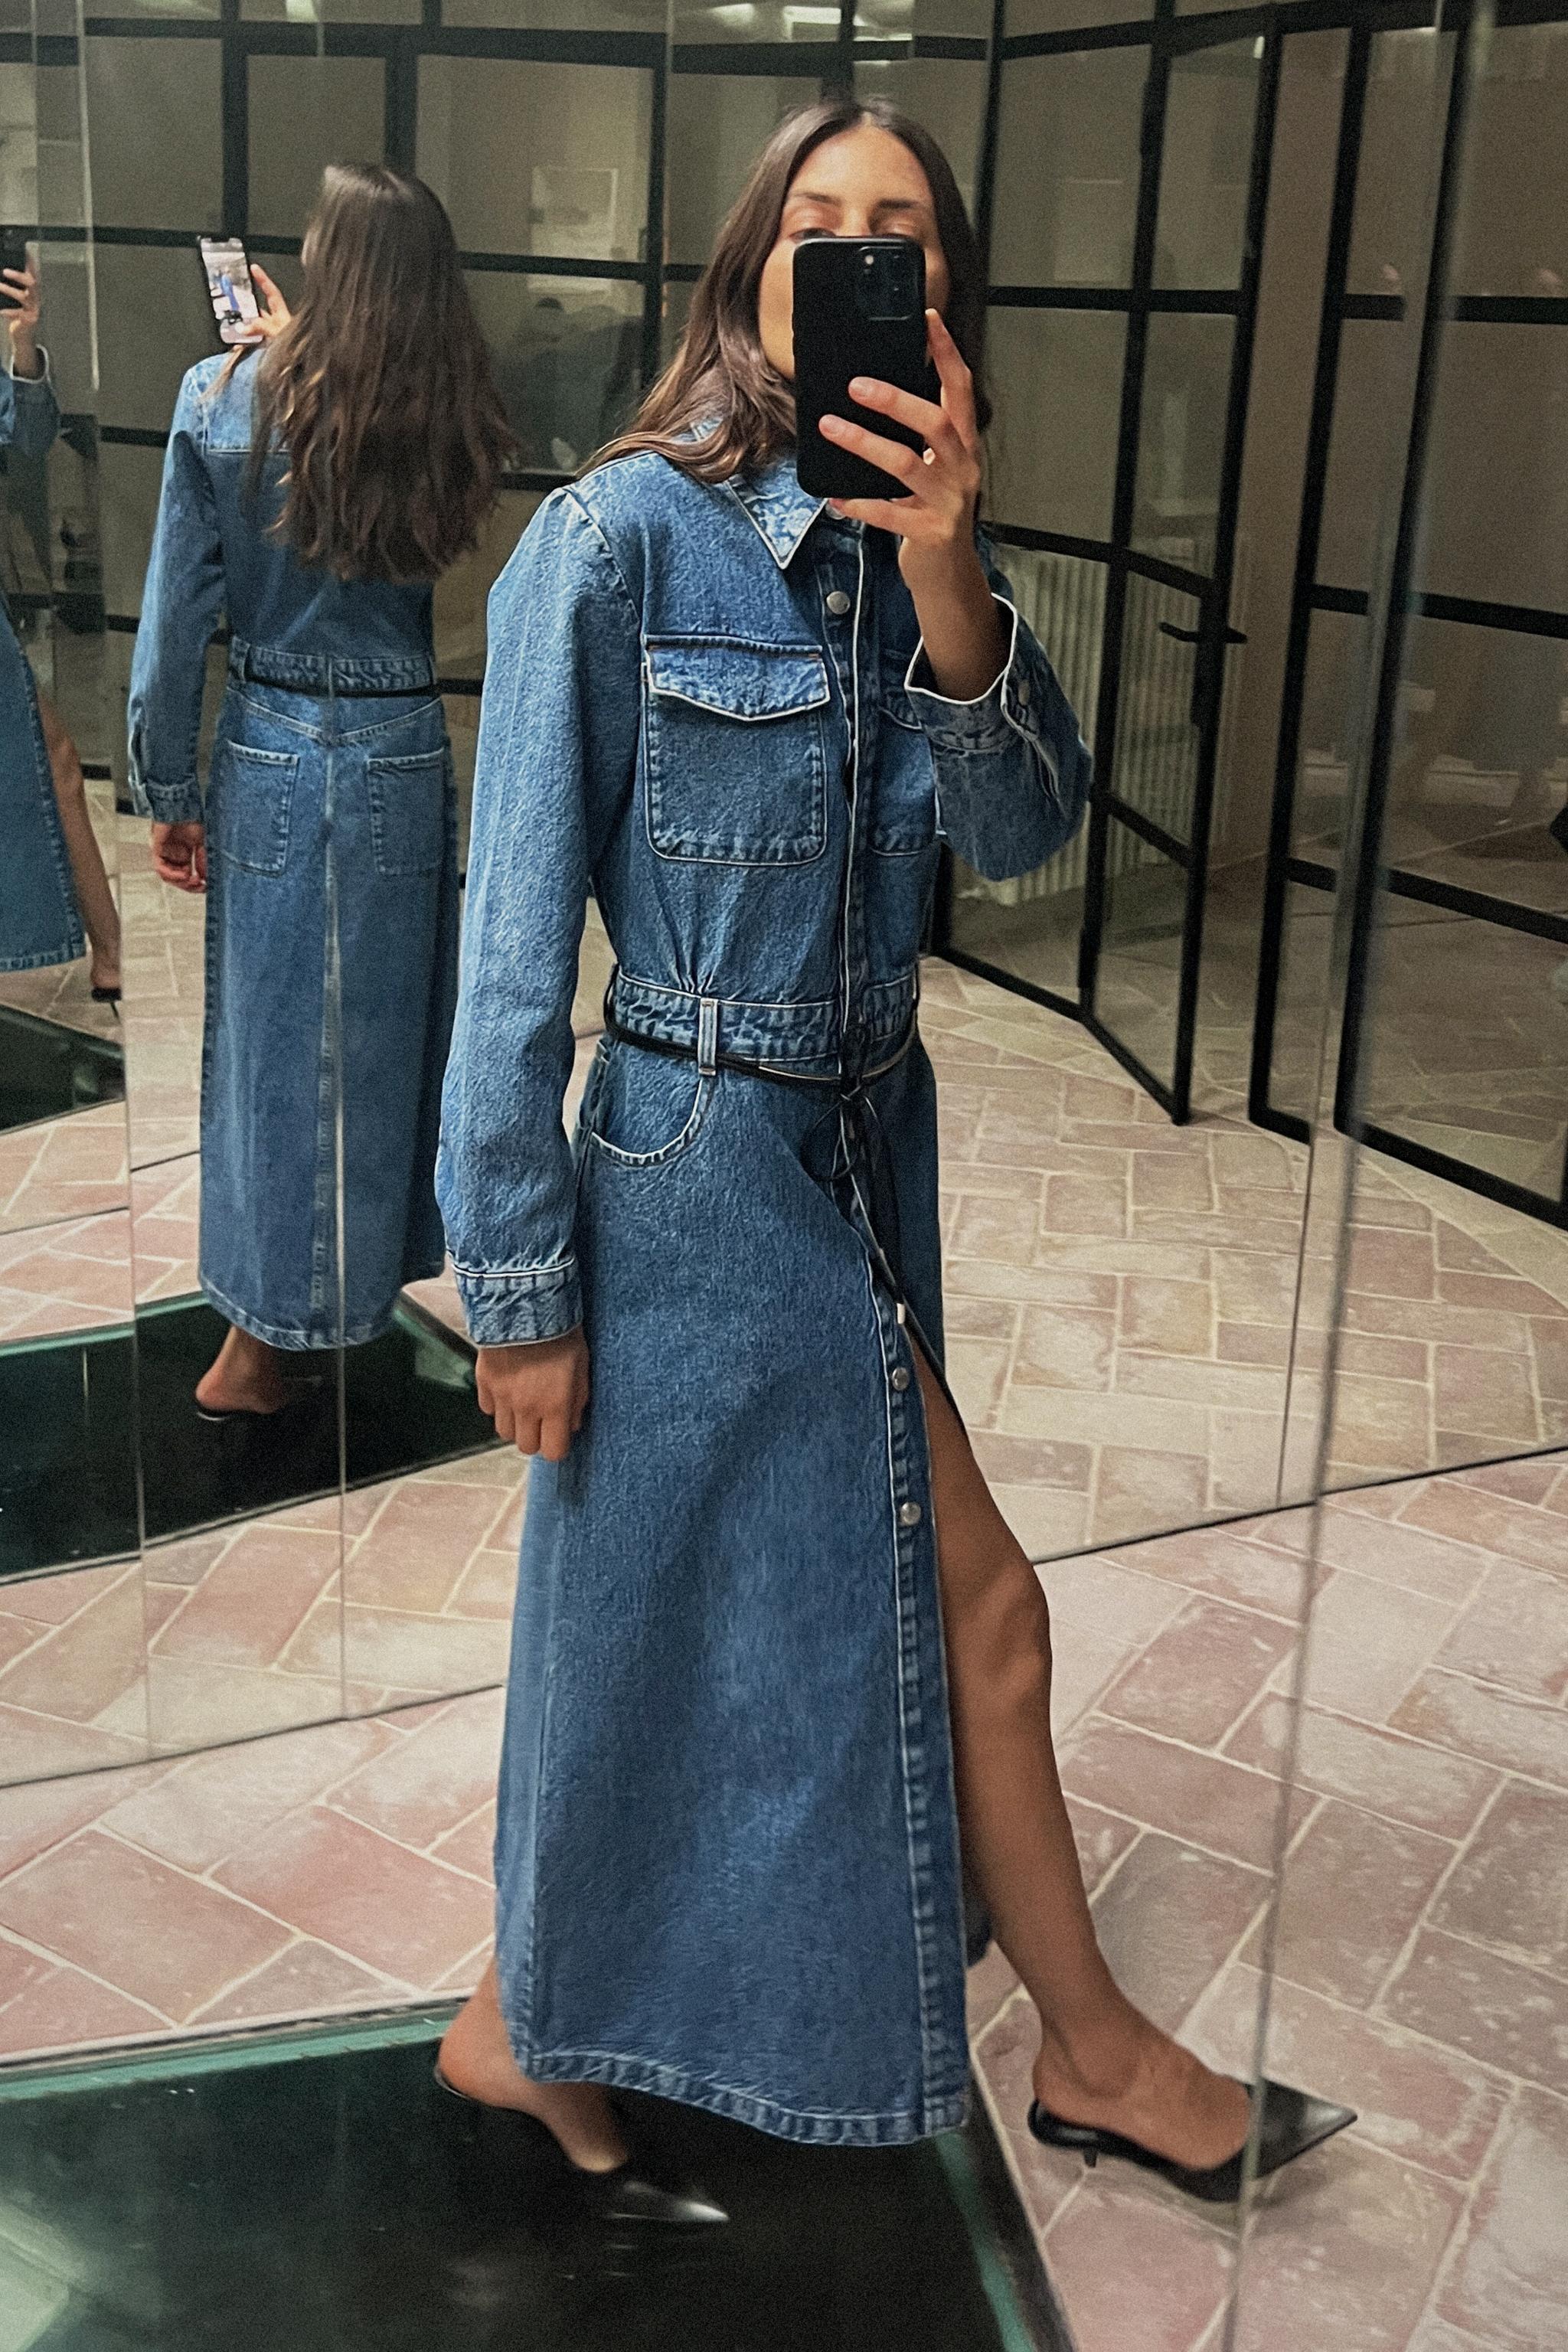 Korean Summer Womens Blue Jeans Denim Dress For Women With Side Button And  Suspender Midi Loose Fit, Available In Large Sizes Up To 5XL From  Sunshineavenue36518, $23.53